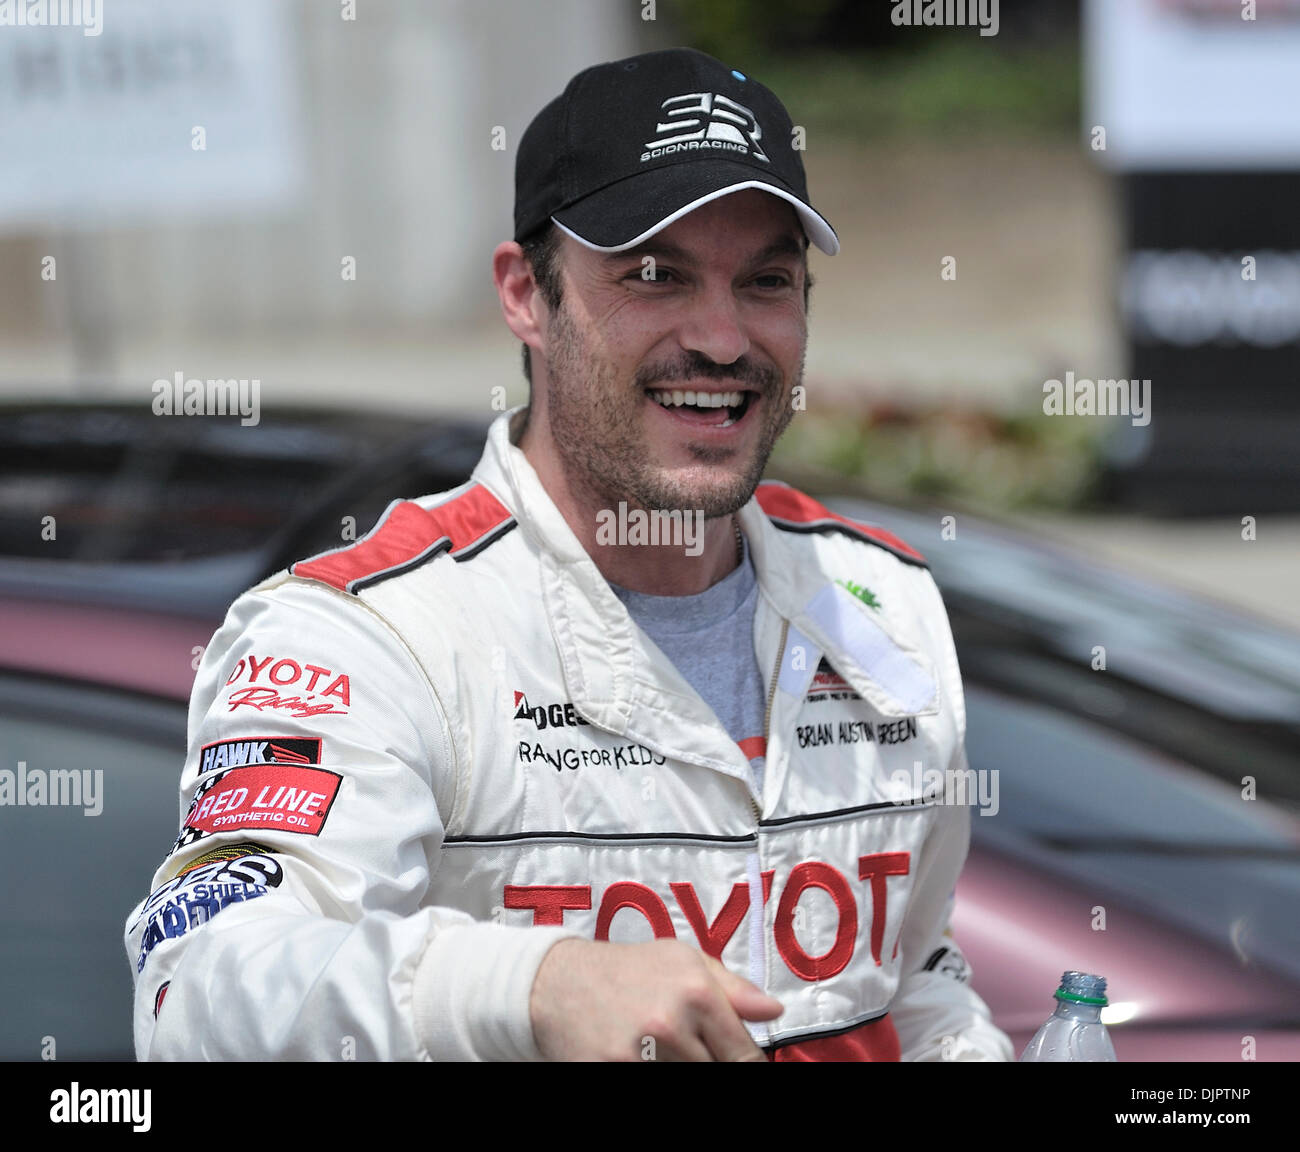 Apr. 17, 2010 - Long Beach, California, U.S. - LONG BEACH, CALIF. USA -- Celebrity Brian Austin Green is all smiles after winning the Pro/Celebrity race during Toyota Grand Prix of Long Beach, Calif  on April 17, 2010. Nikko Gonzalez is the son of Tony Gonzalez, tight end for the Atlanta Falcons and this year's Pro/Celebrity Grand Marshall..Photo by Jeff Gritchen / Long Beach Press Stock Photo